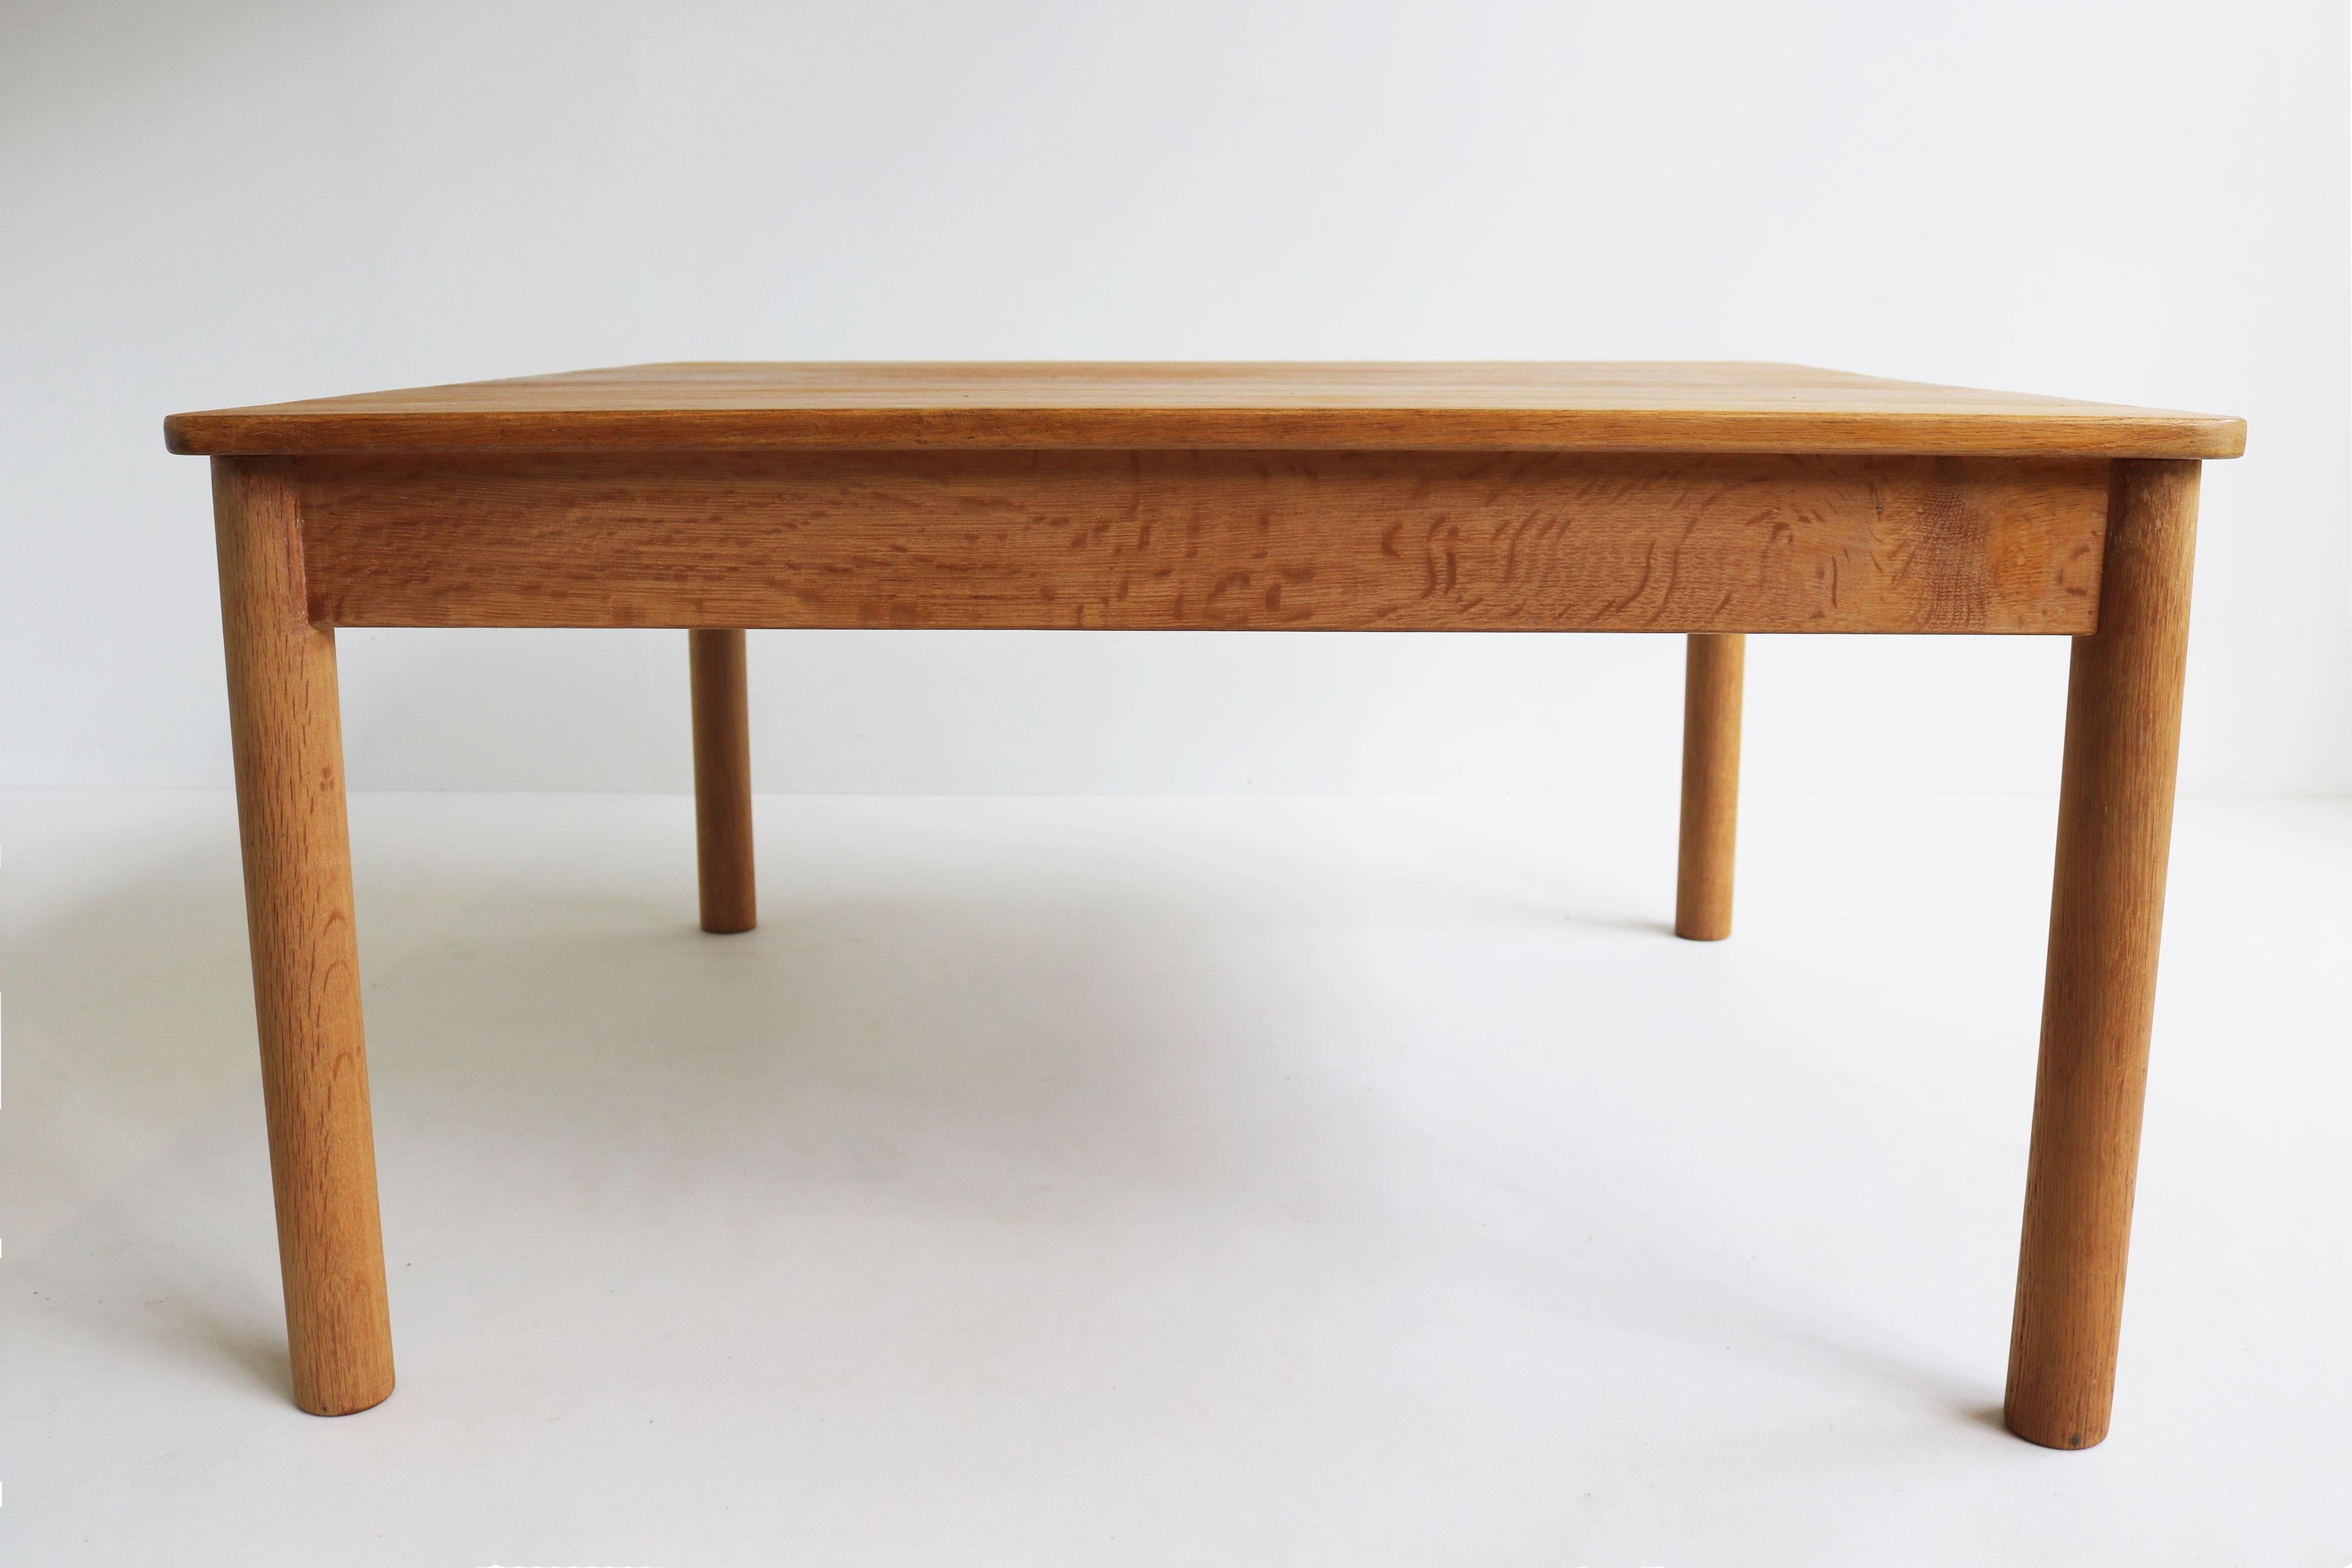 Large solid oak coffee table Model: 5351 by Borge Mogensen for Fredericia 1950 For Sale 1